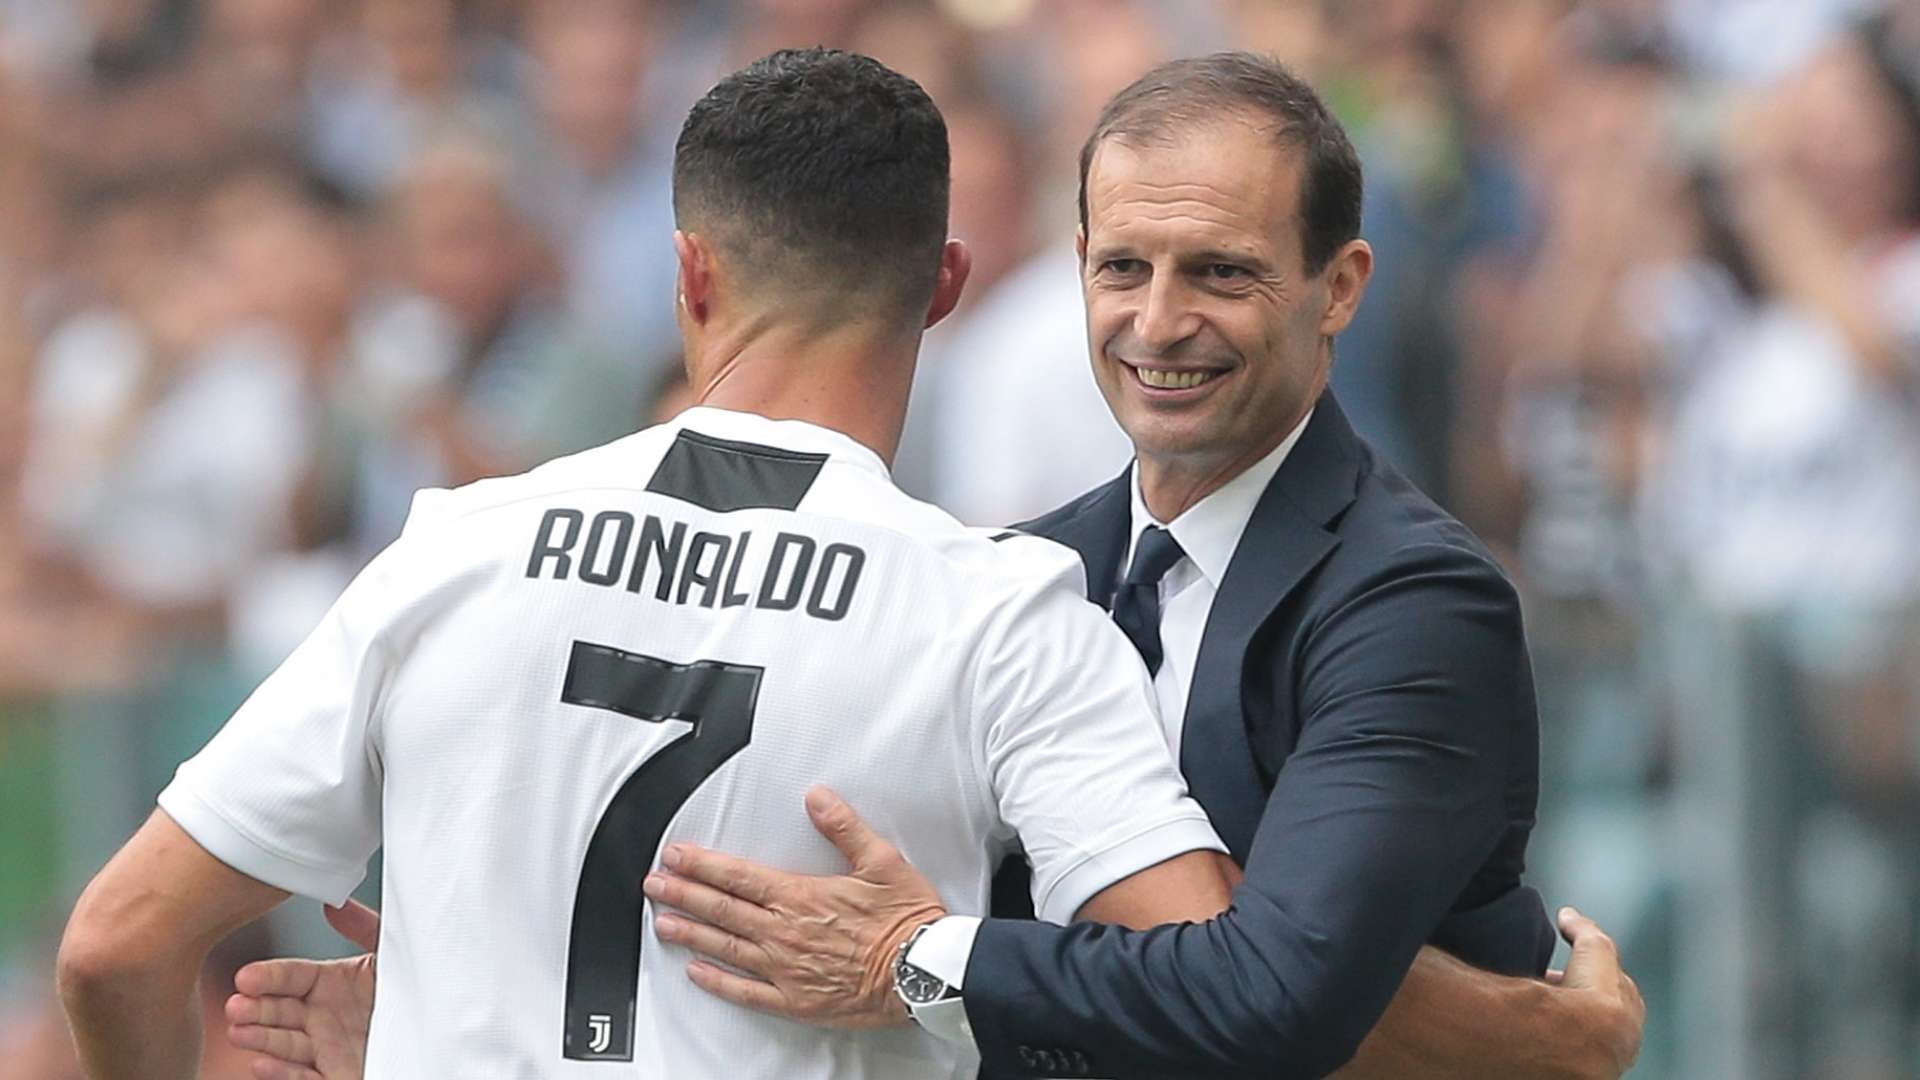 Allegri to replace Pirlo as Juventus boss following Serie A failure as Real Madrid miss out